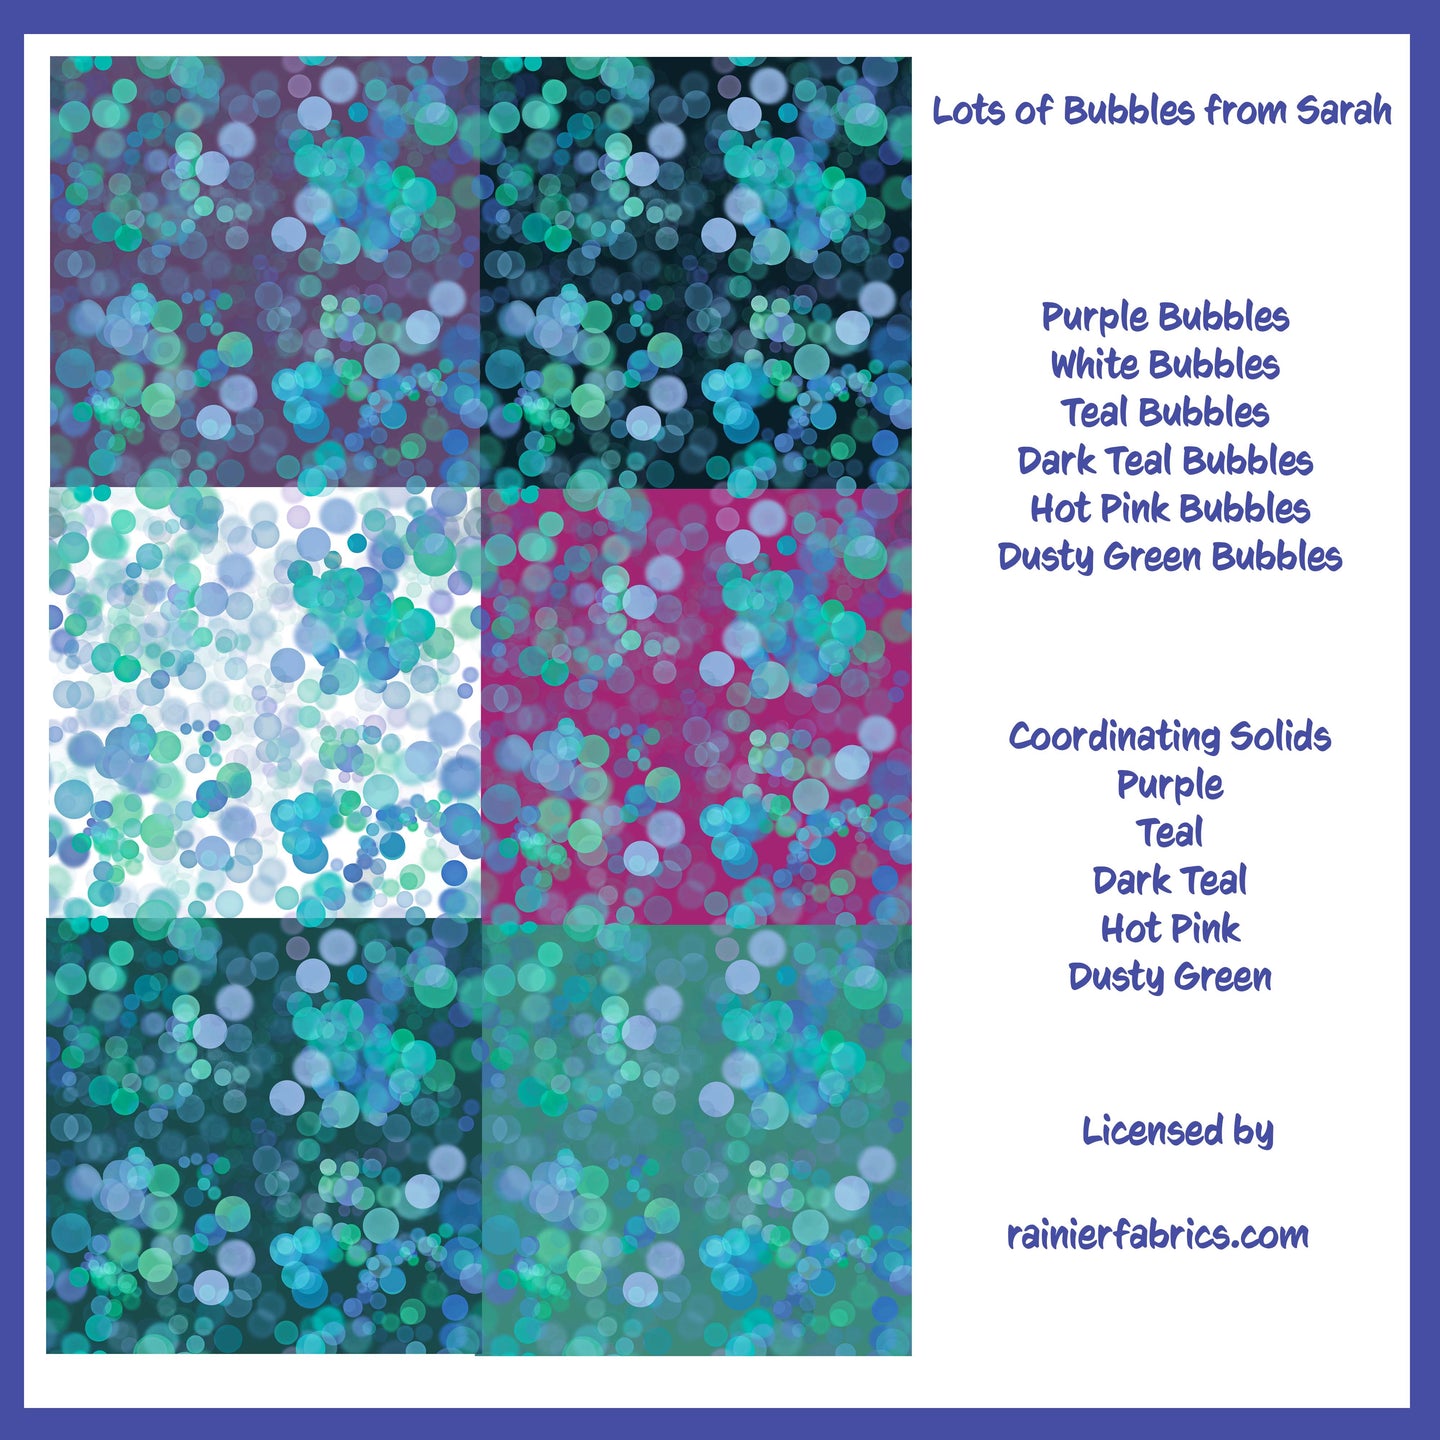 Lots of Bubbles Collection from Sarah - 2-5 day turnaround - Order by 1/2 yard; Description of bases below